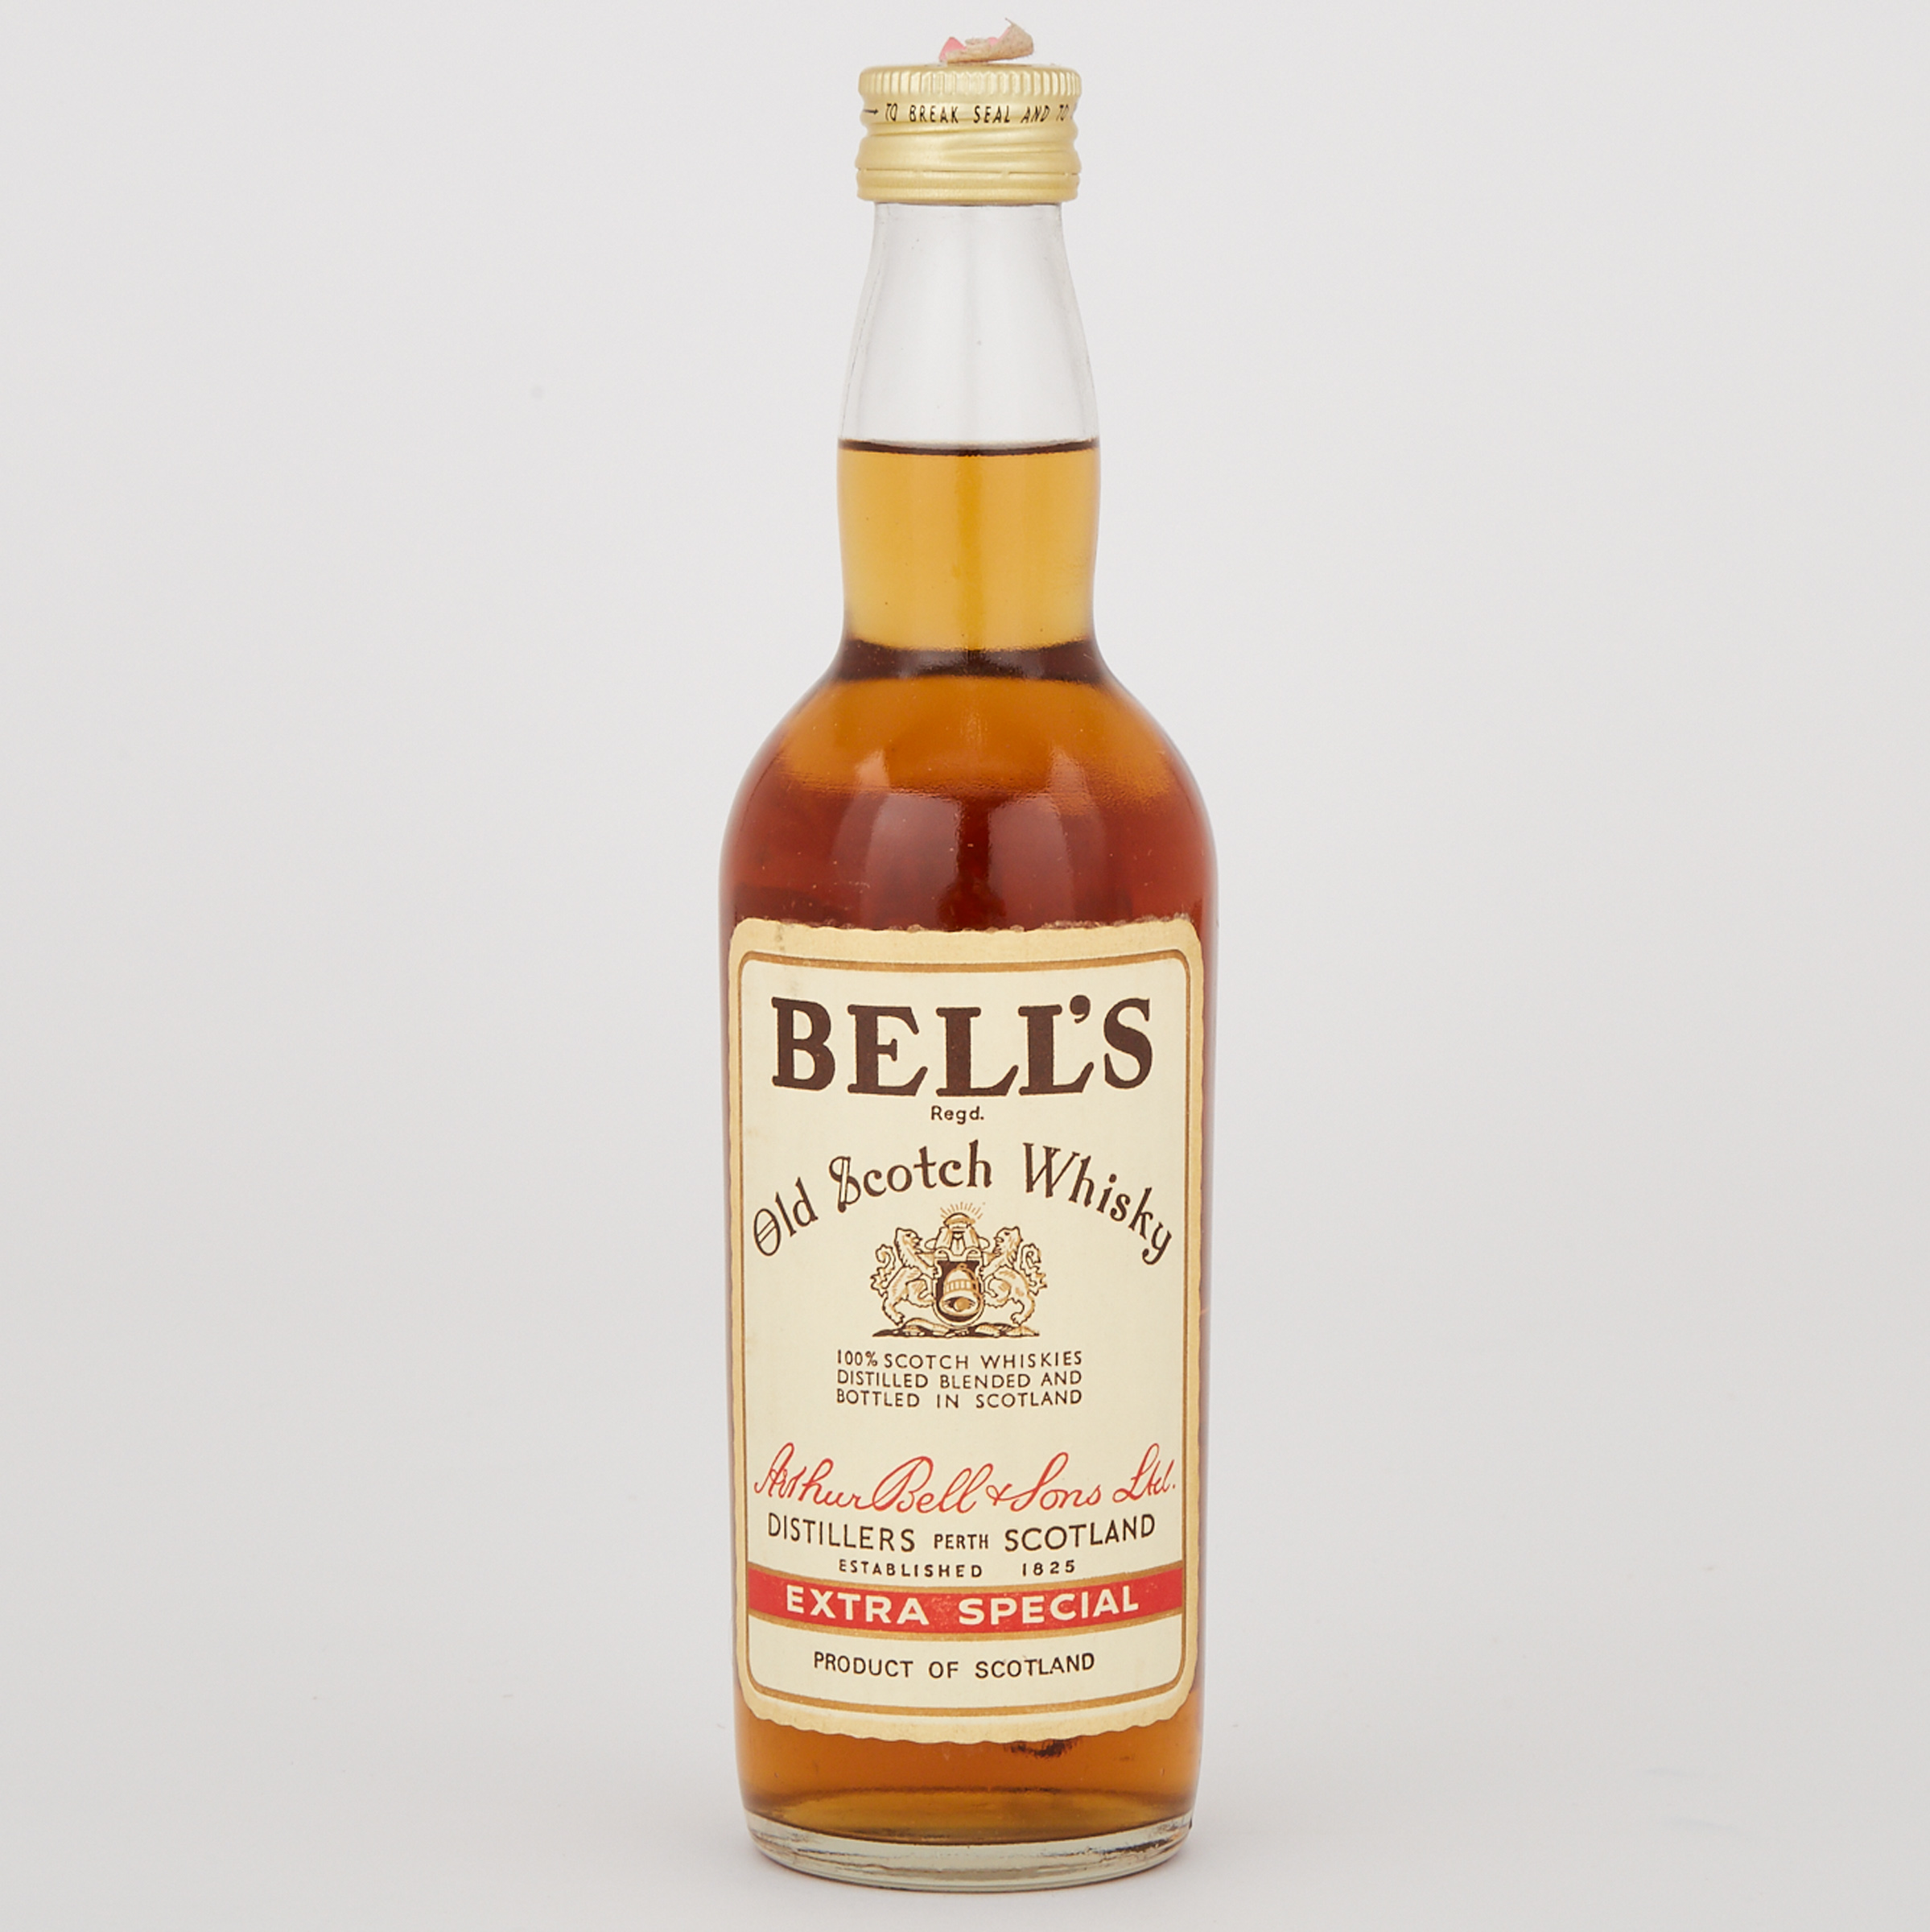 BELL’S EXTRA SPECIAL OLD SCOTCH WHISKY (ONE 13 1/2 OZ)